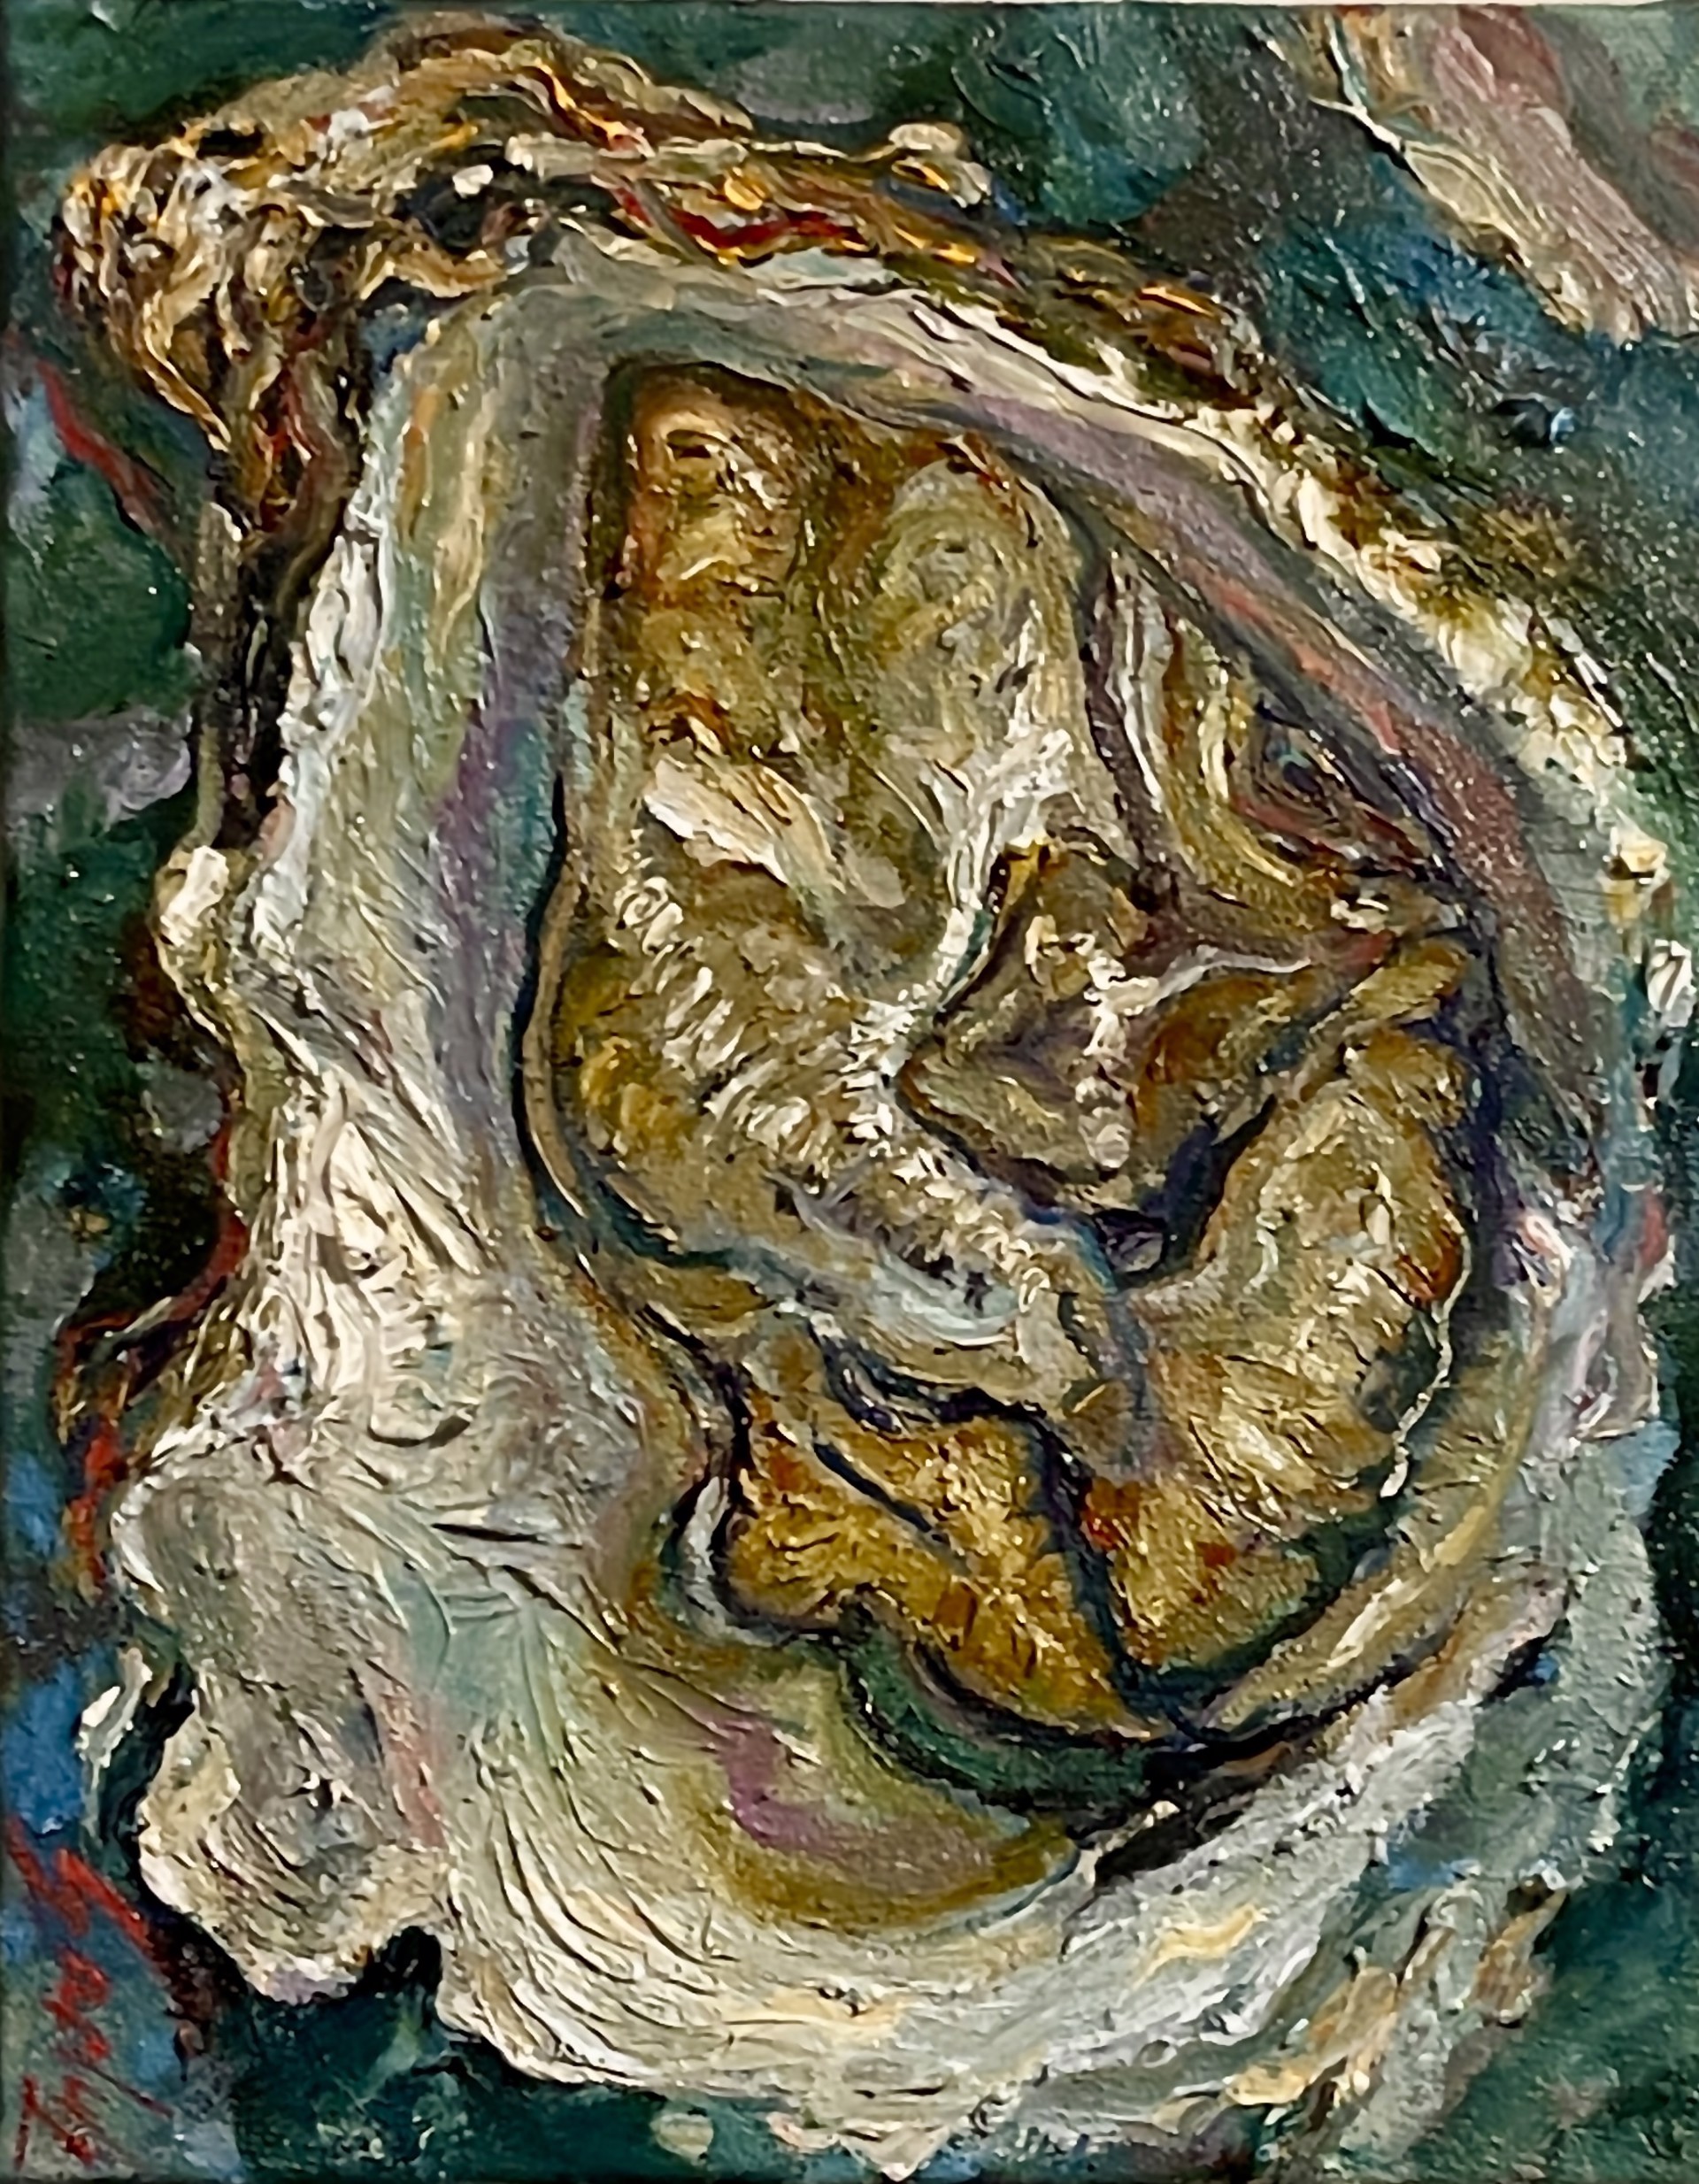 Old Man Oyster by Carrie Jadus